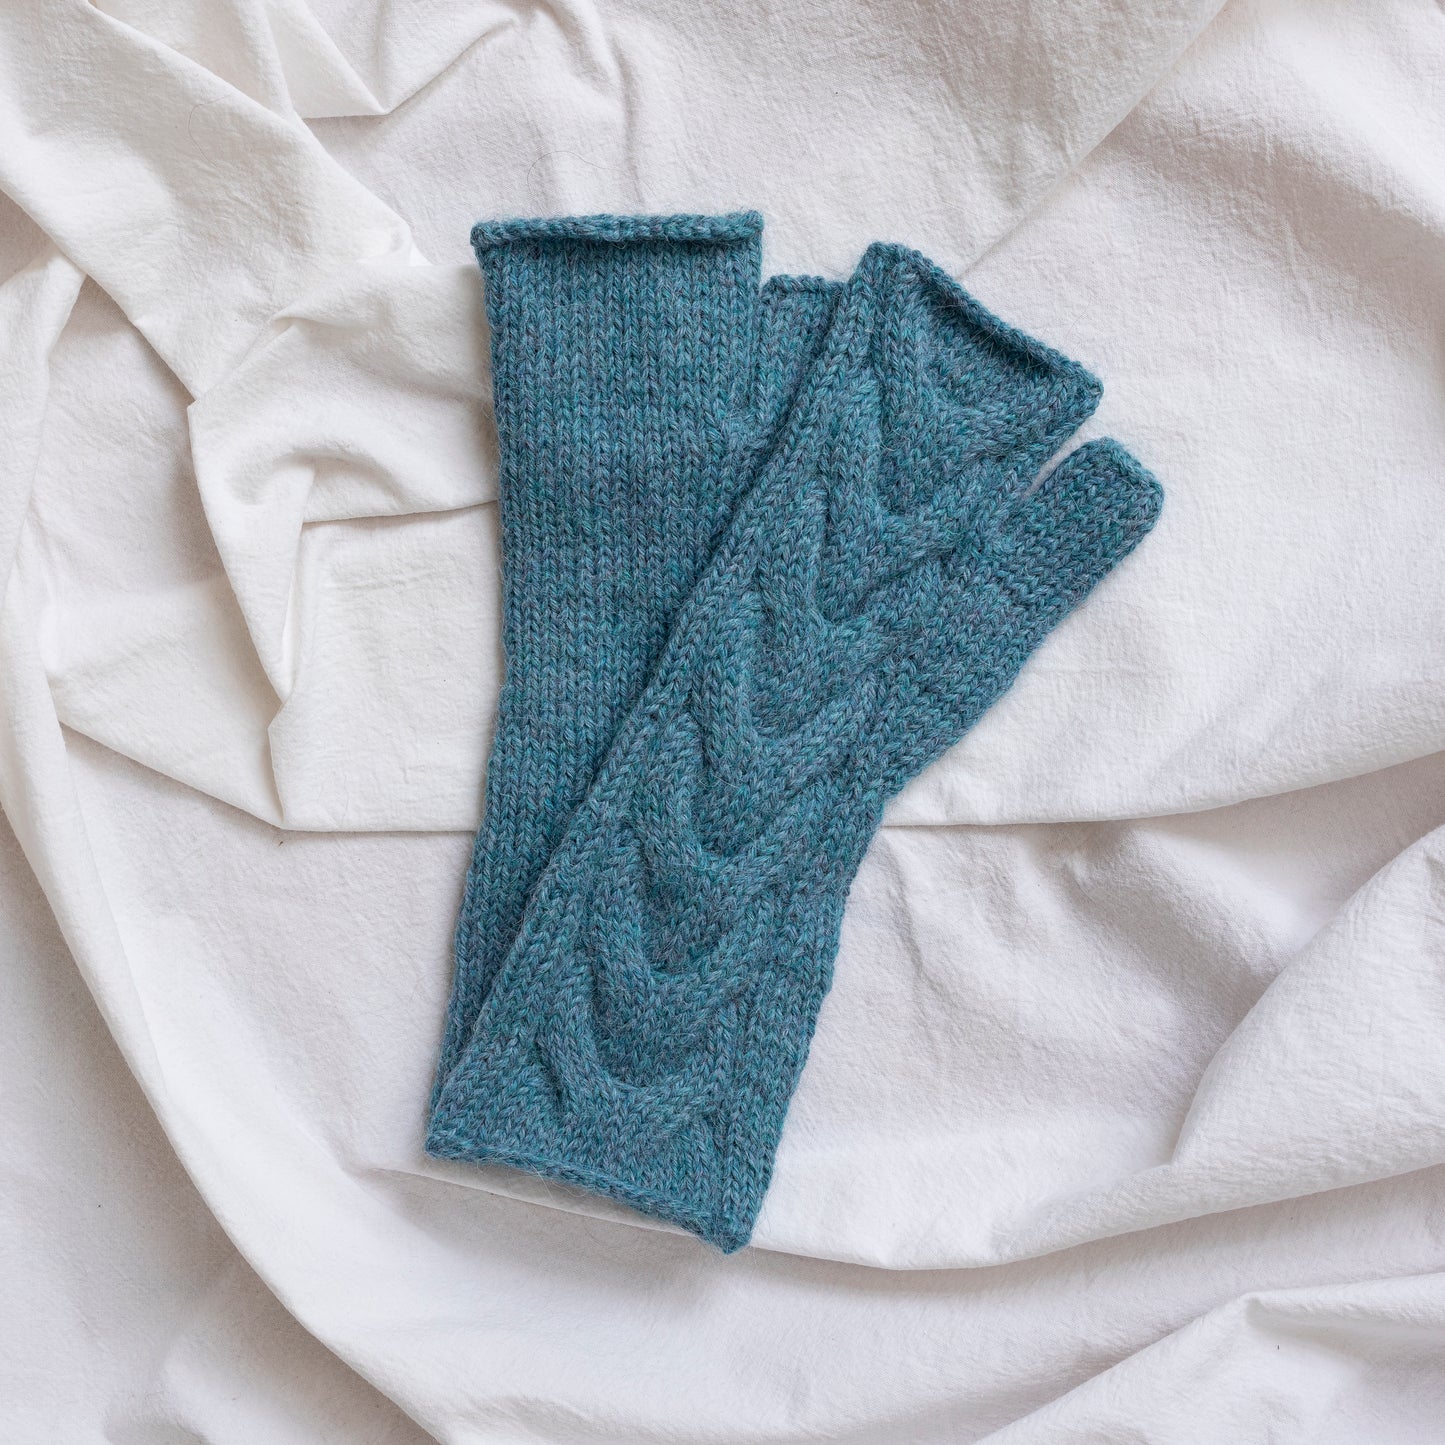 Sky blue coloured, super-soft and silky hand-knitted alpaca wool mittens.